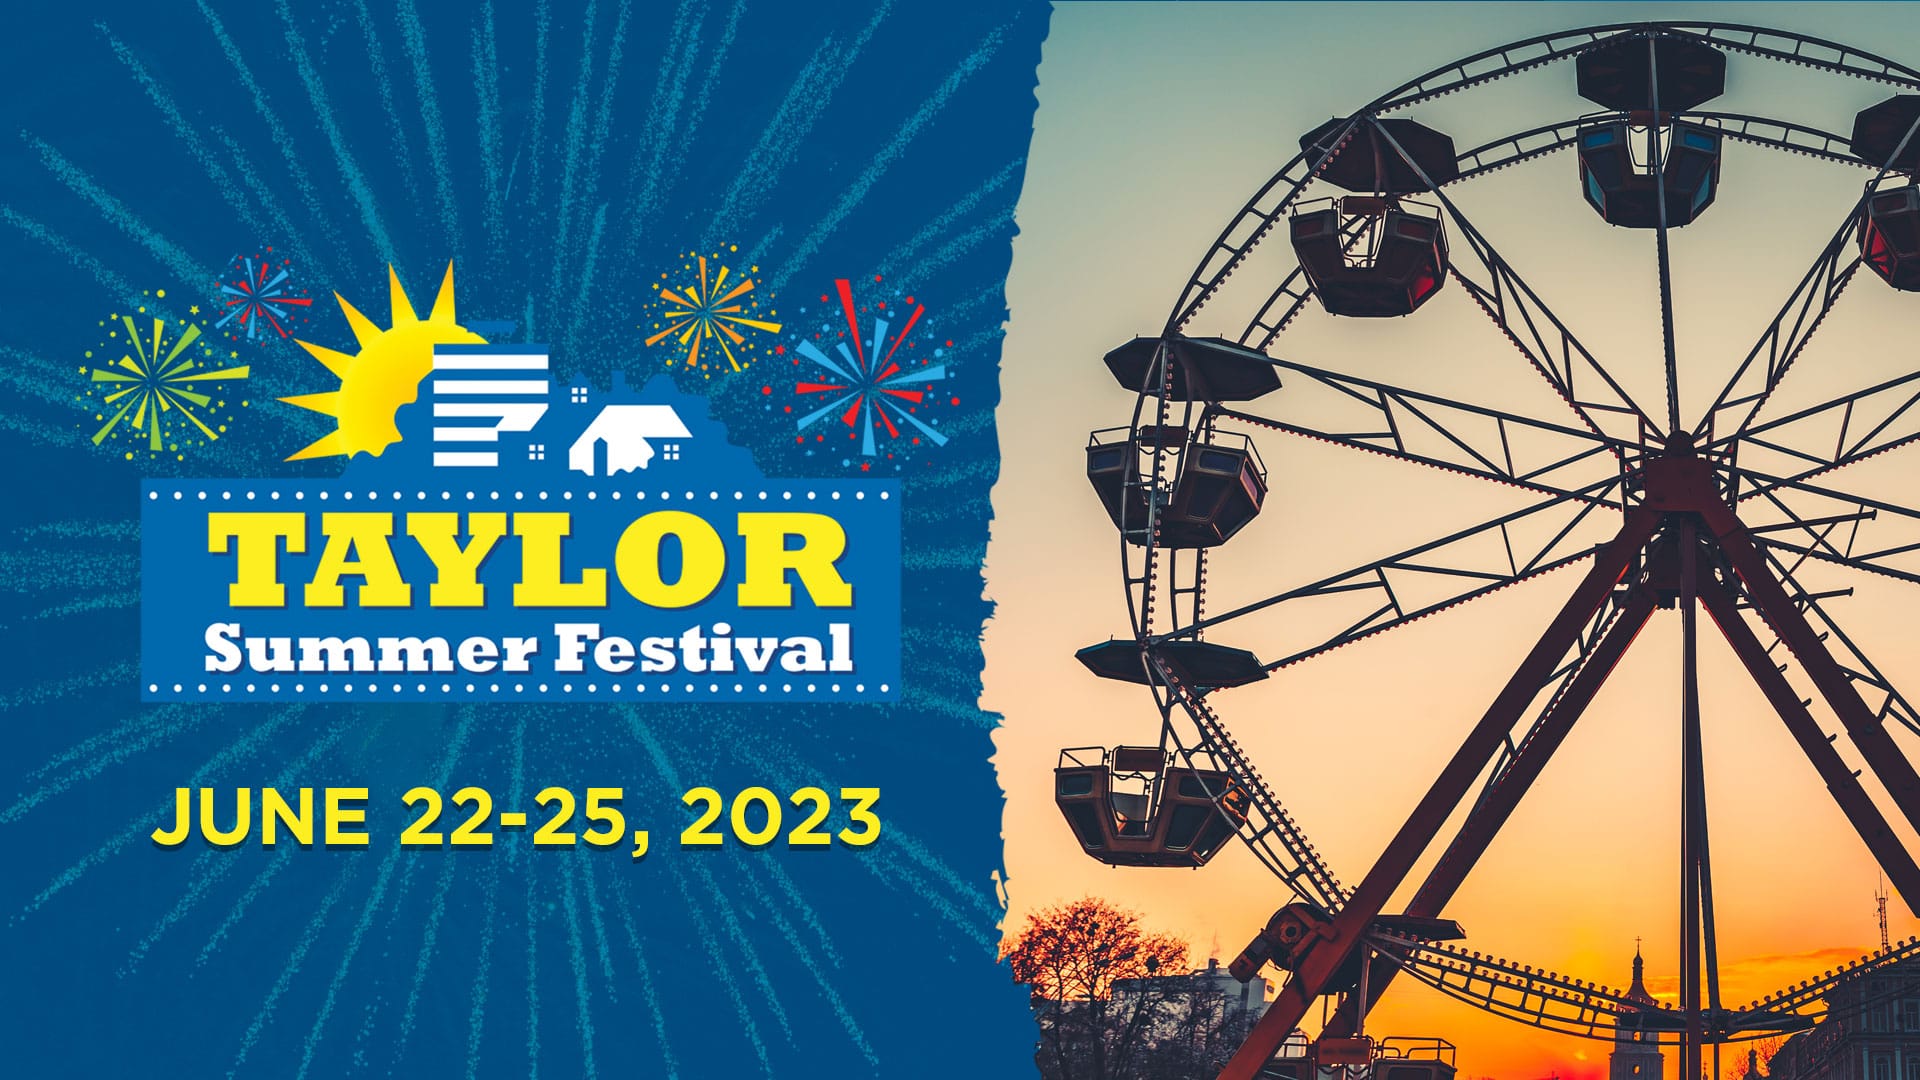 Taylor Summer Festival June 22-25, 2023 with image of a ferris wheel at sunset